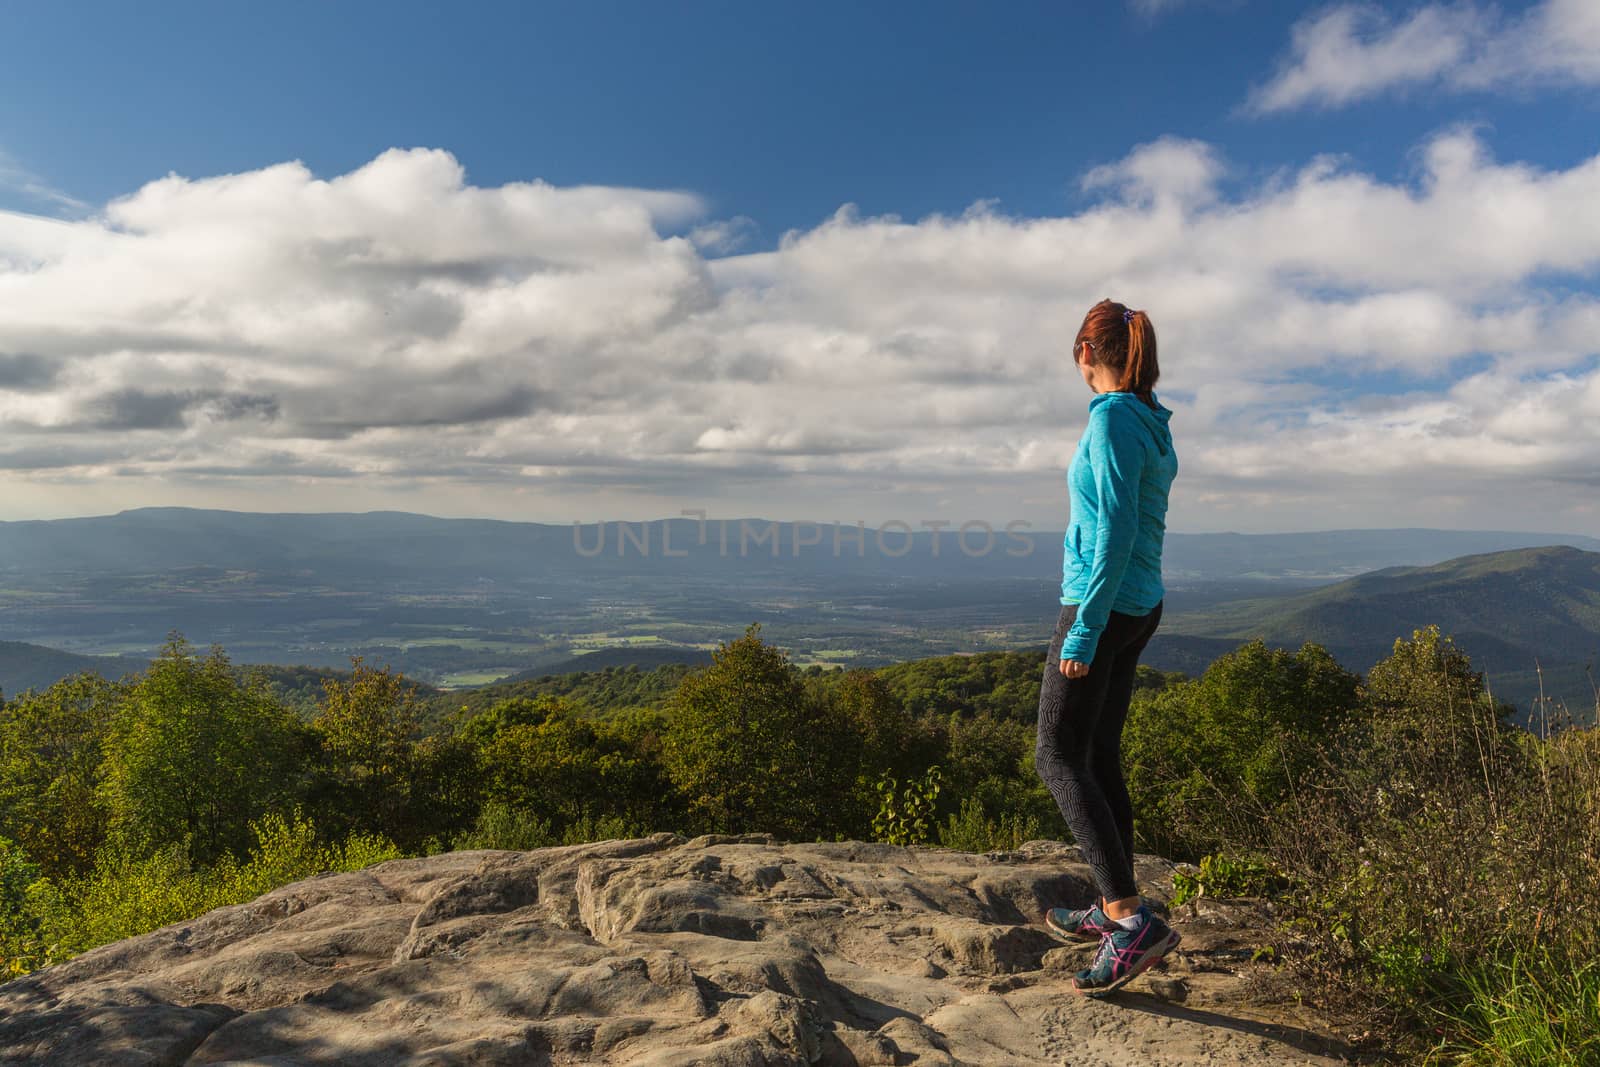 Woman over looking the Blue Ridge Mountains by chrisukphoto